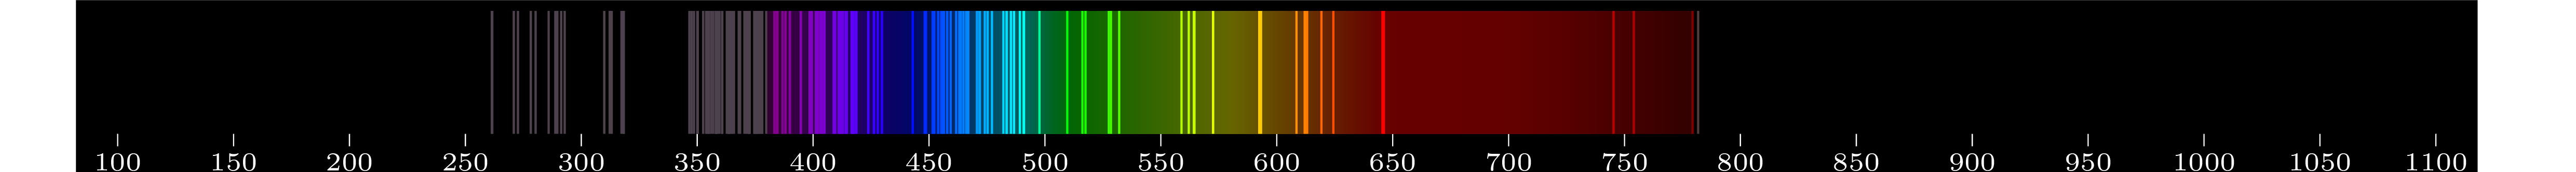 emmision spectra of element Tc